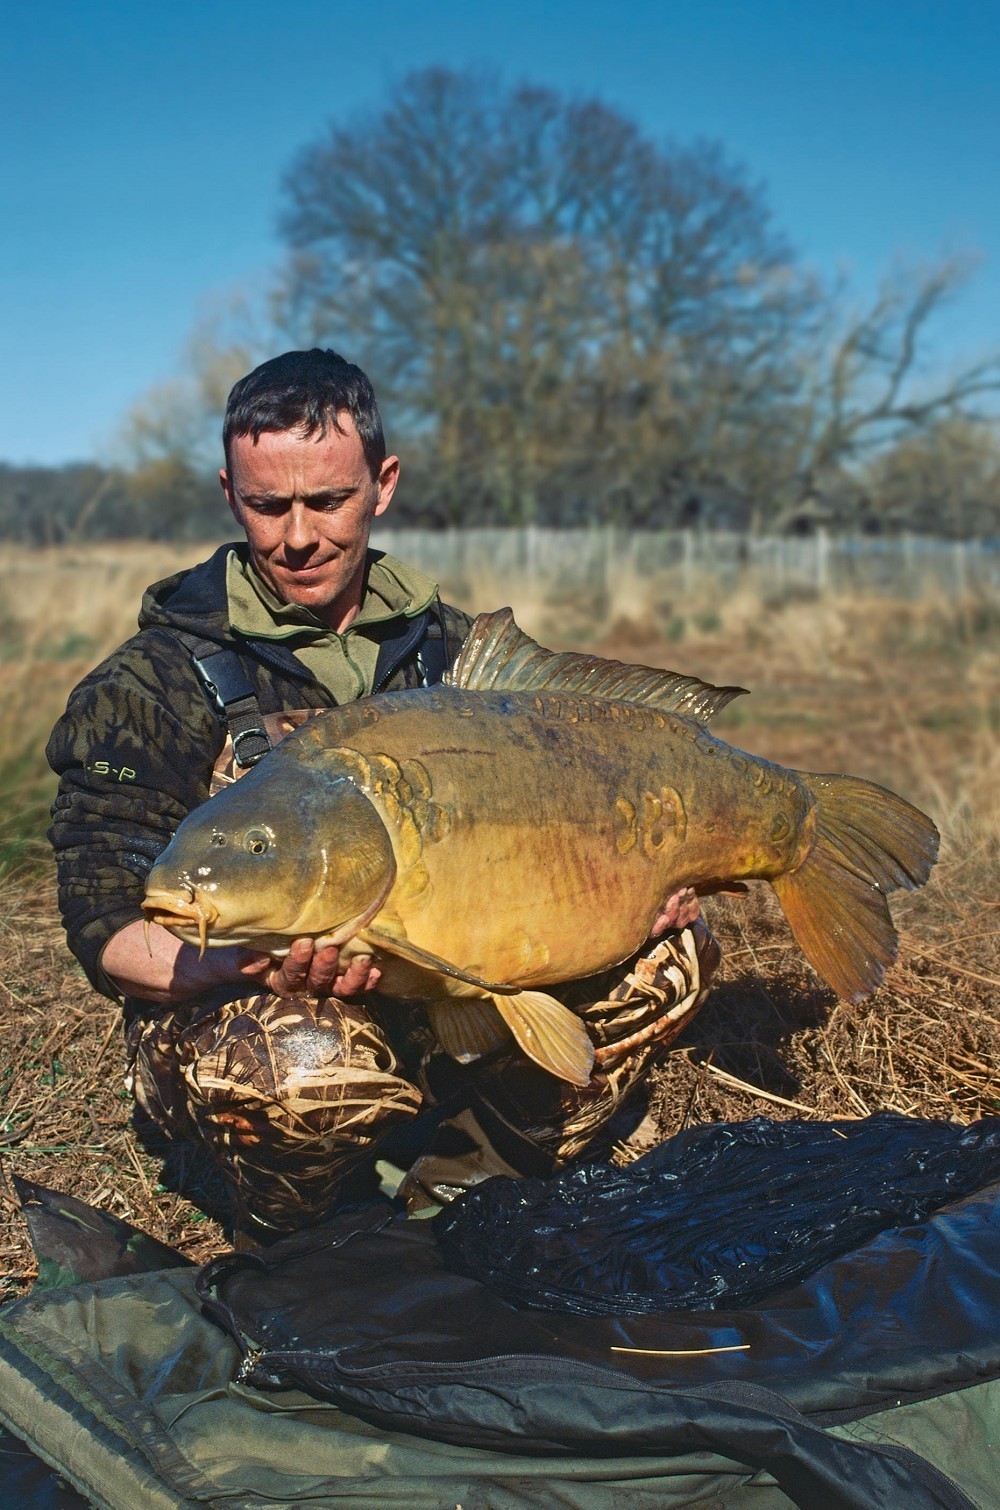 The 50 Greatest Carp Of All Time: Part 1